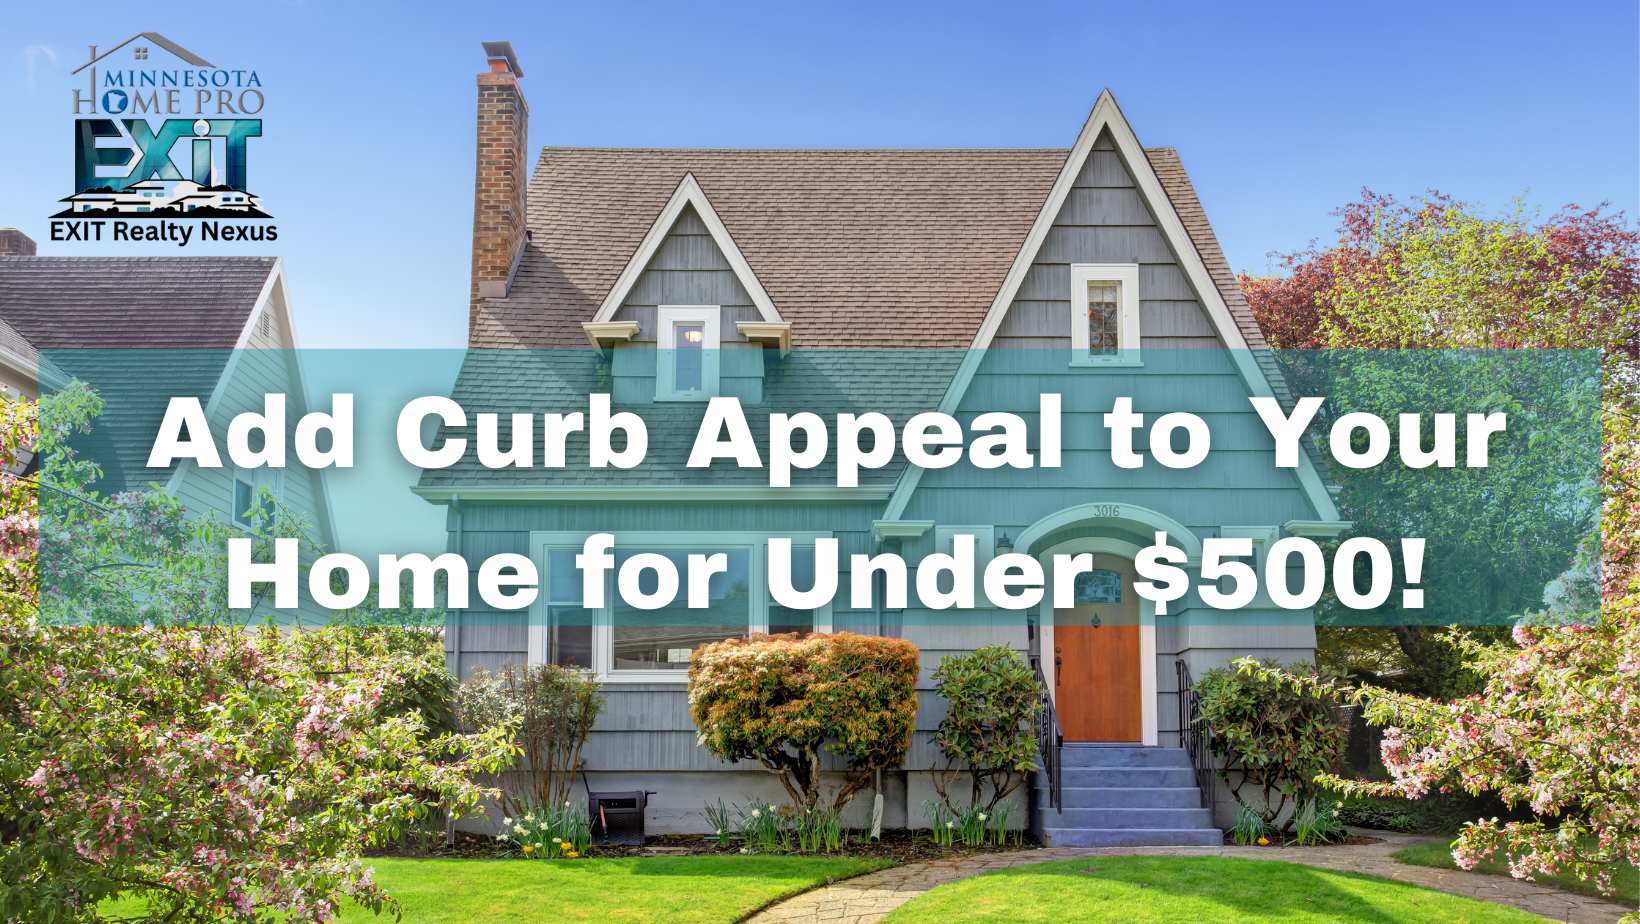 Add Curb Appeal to Your Home for Under $500